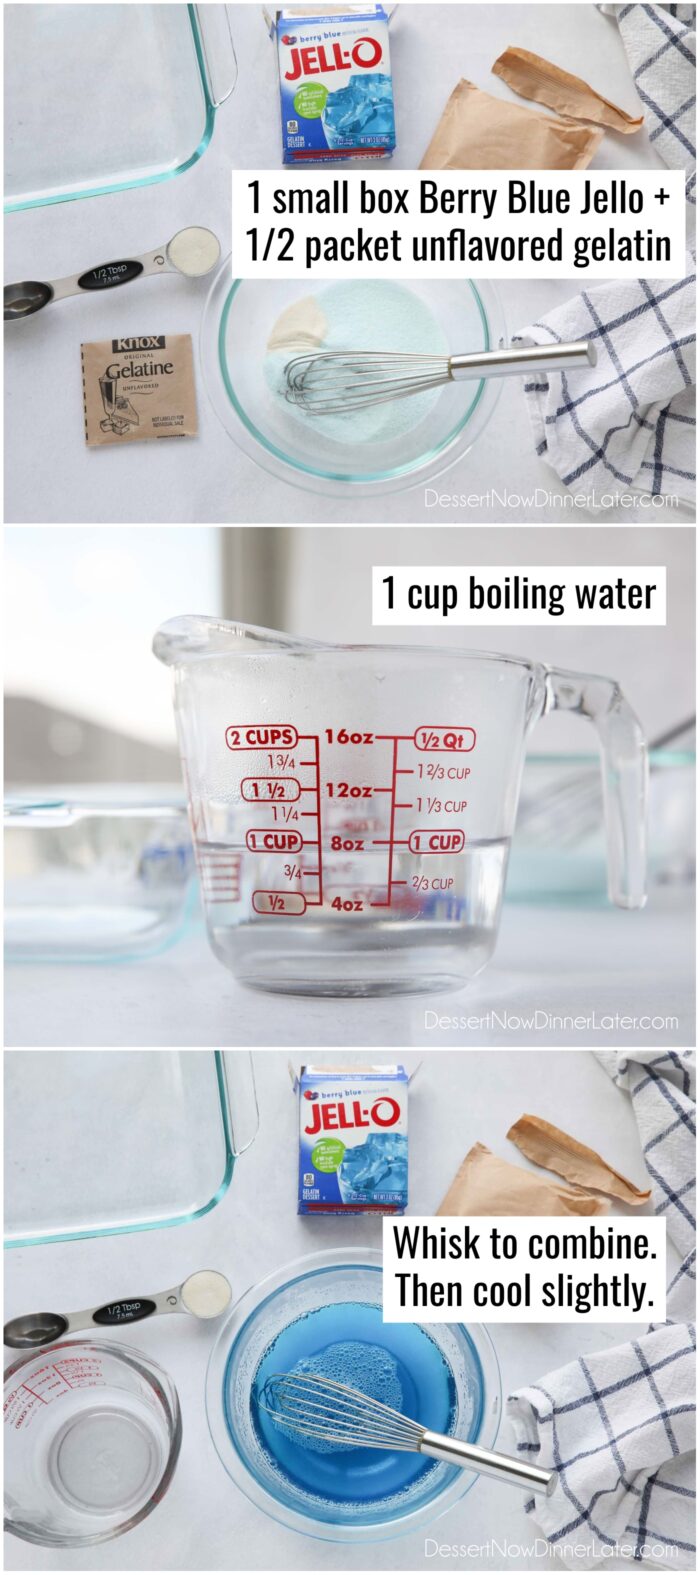 Blue Layer: Mix one box berry blue jello with half a packet of unflavored gelatin, and 1 cup boiling water.